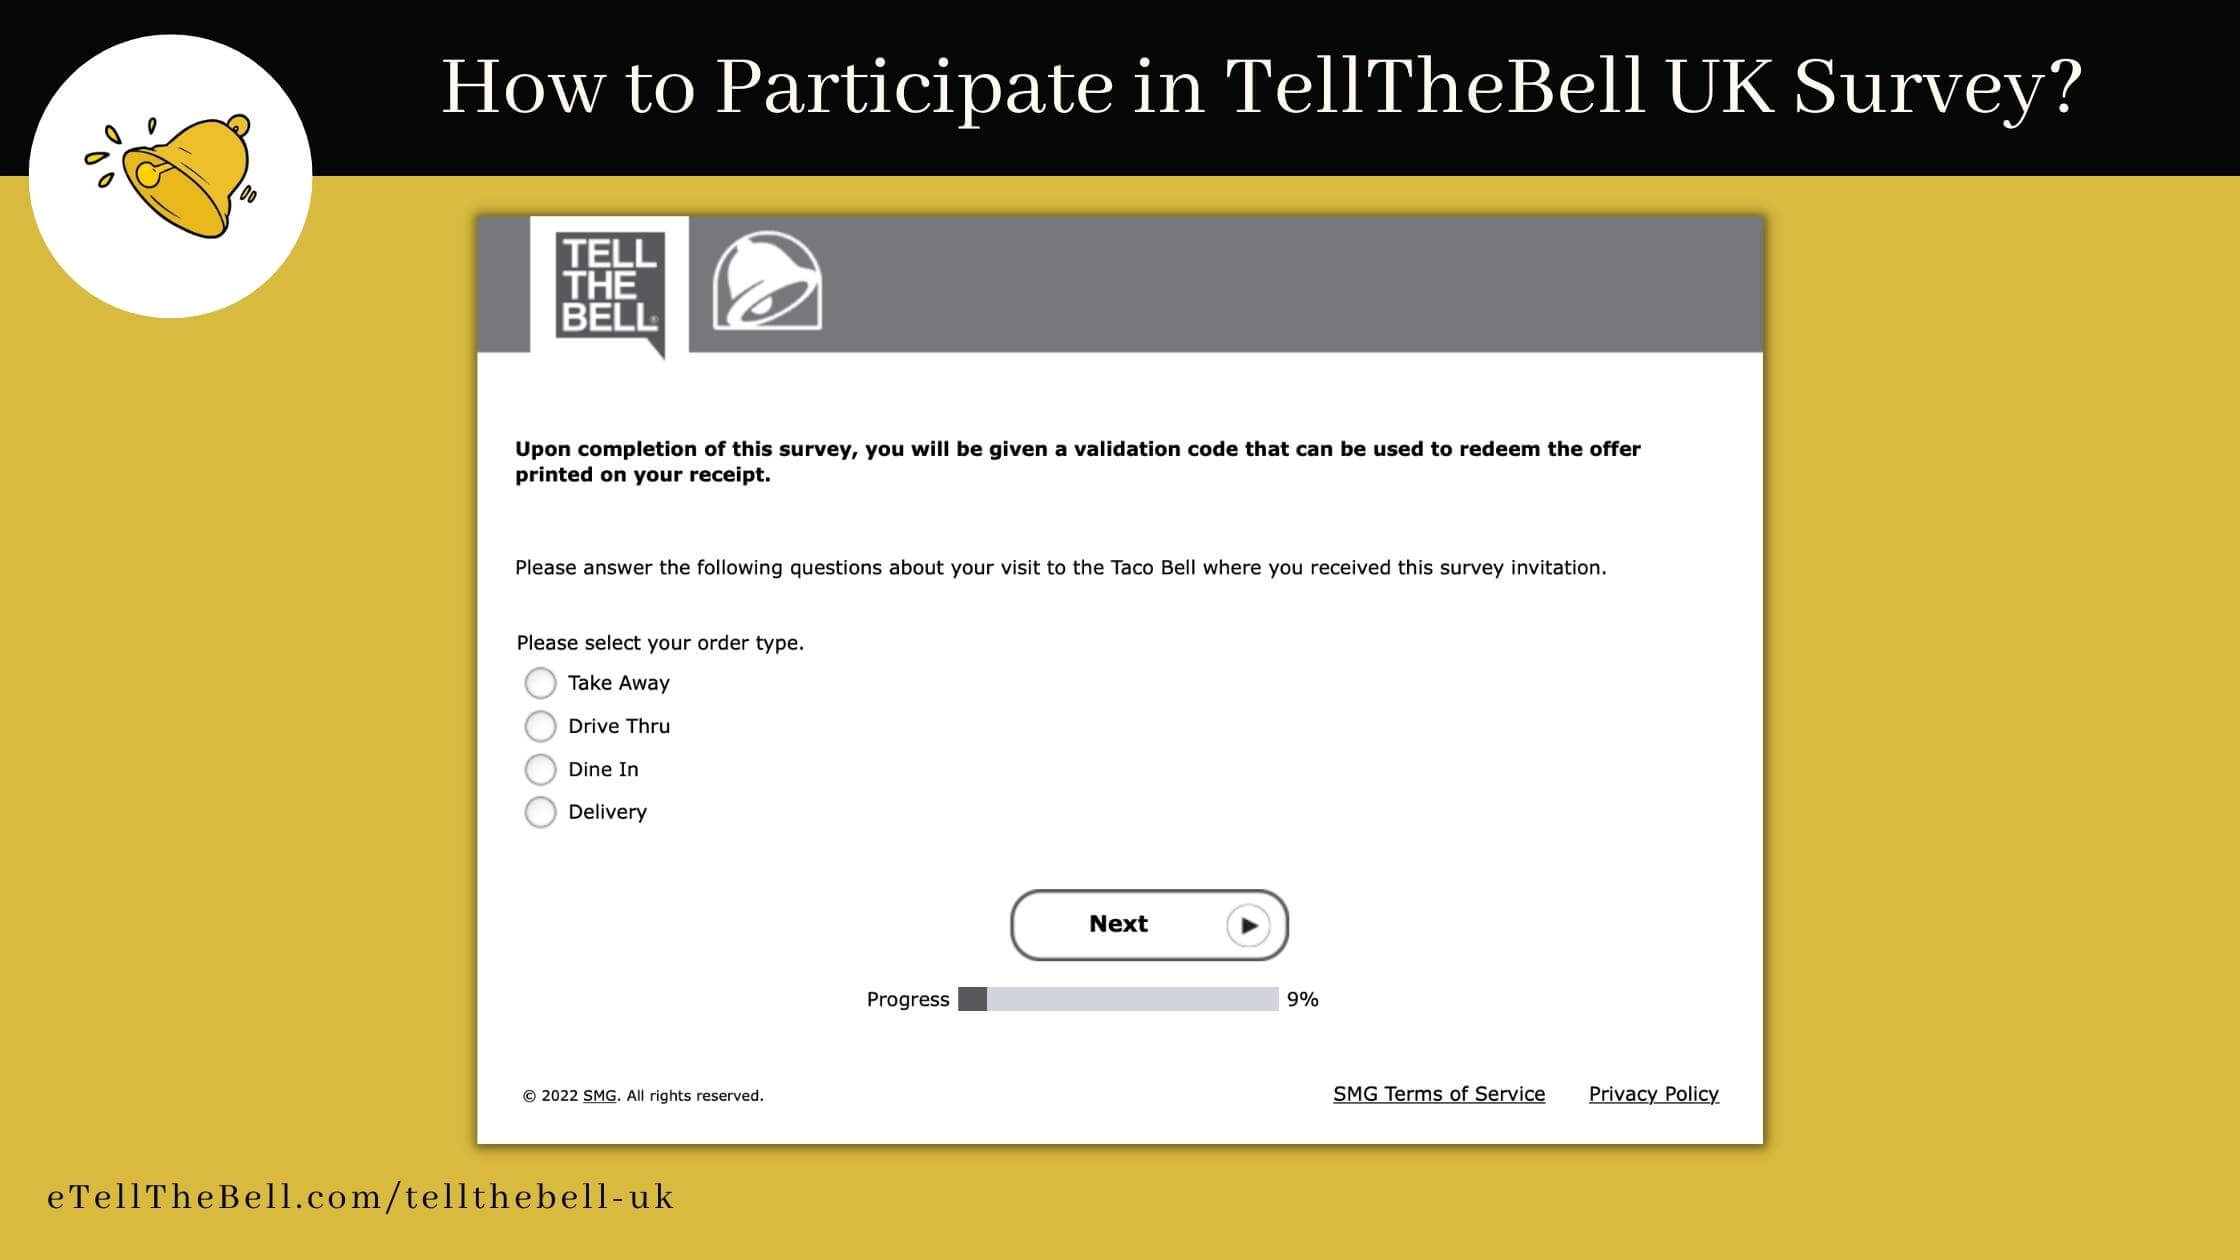 Please select your order type - TellTheBell UK